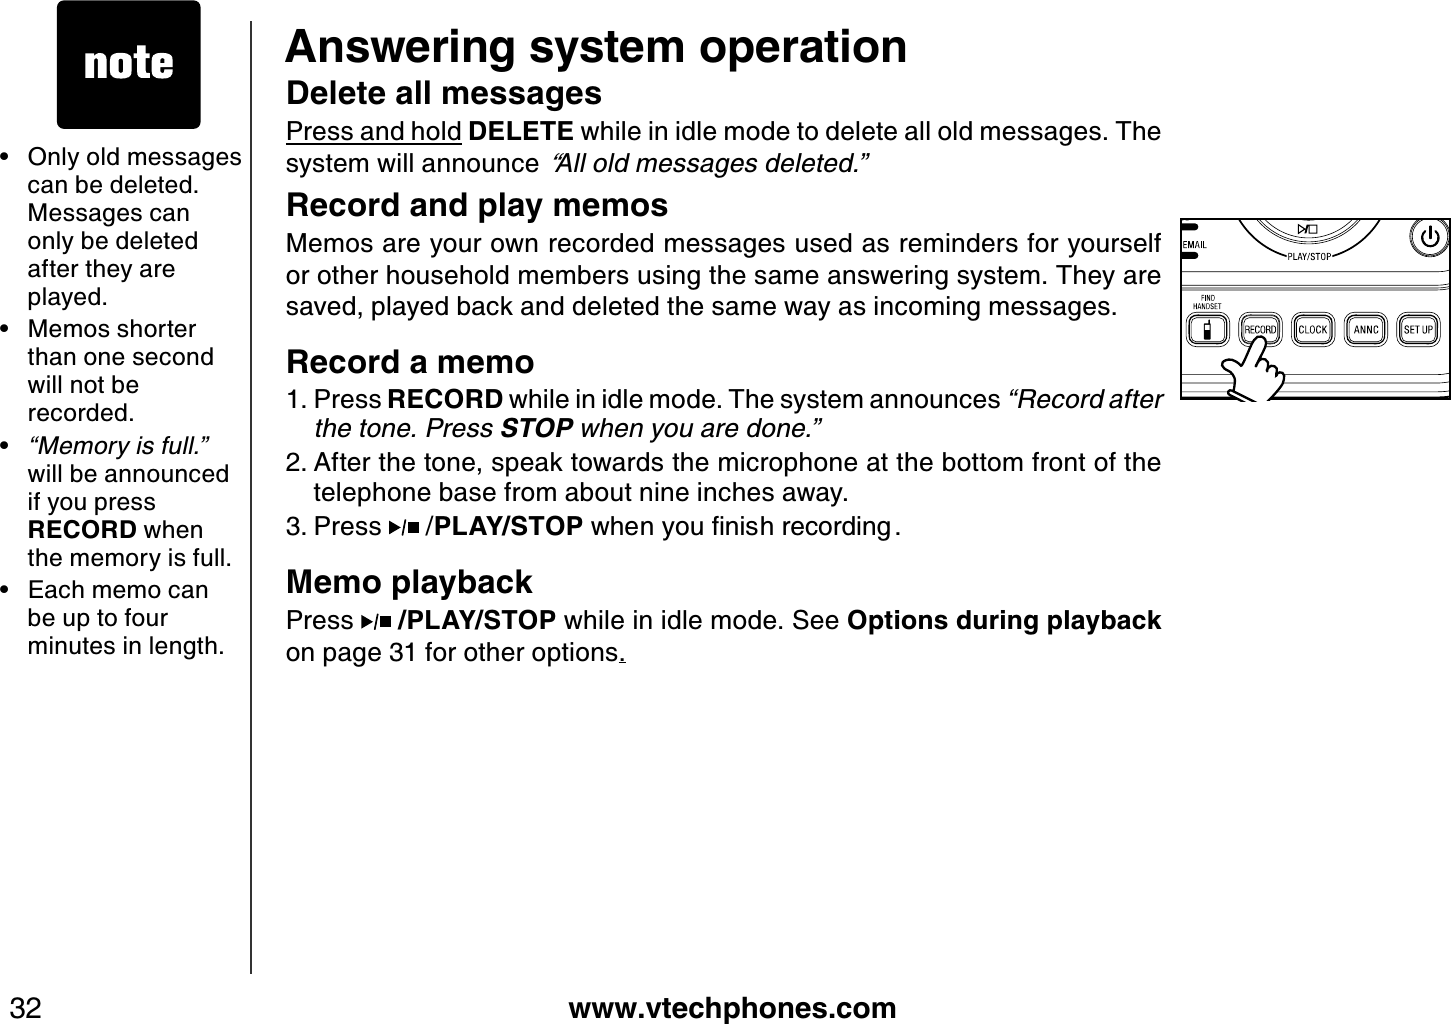 www.vtechphones.com32Answering system operation• Only old messages can be deleted. Messages can only be deleted after they are played.• Memos shorter than one second will not be recorded.•“Memory is full.” will be announced if you press RECORD when the memory is full.• Each memo can be up to four minutes in length.Delete all messagesPress and hold DELETE while in idle mode to delete all old messages. The system will announce “All old messages deleted.”Record and play memosMemos are your own recorded messages used as reminders for yourself or other household members using the same answering system. They are saved, played back and deleted the same way as incoming messages.Record a memoPress RECORD while in idle mode. The system announces “Record after the tone. Press STOP when you are done.” After the tone, speak towards the microphone at the bottom front of the telephone base from about nine inches away.Press   /PLAY/STOPYJGP[QWſPKUJTGEQTFKPI Memo playbackPress  /PLAY/STOP while in idle mode. See Options during playbackon page 31 for other options.1.2.3.